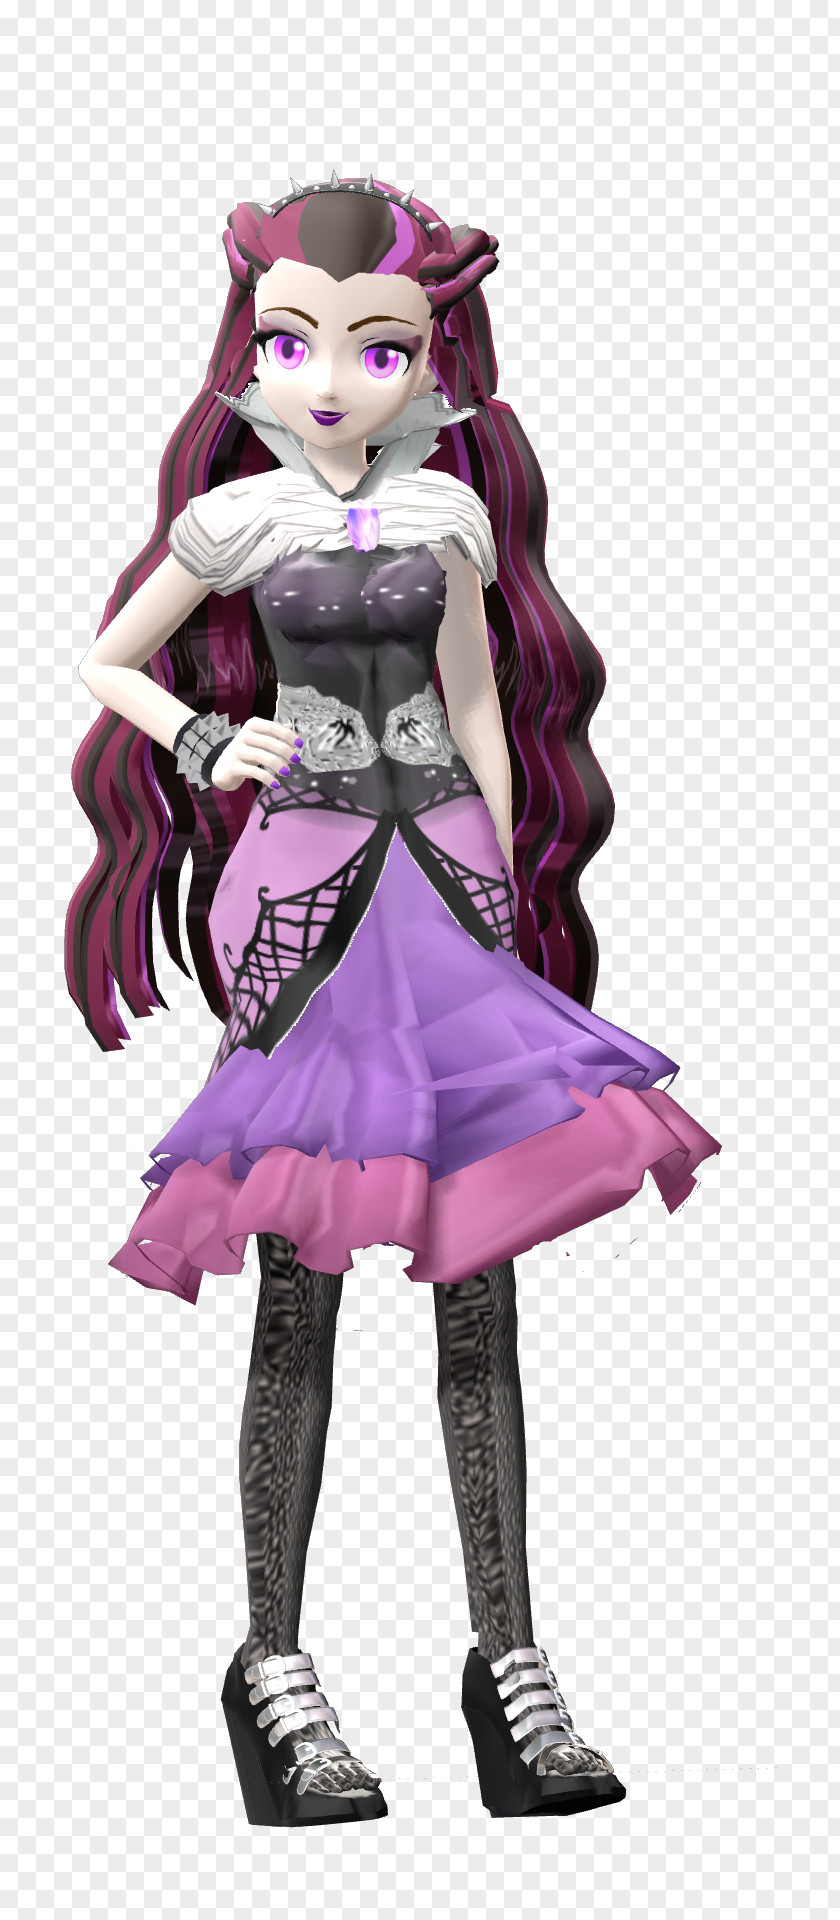 Raven Ever After High Doll Queen Character PNG